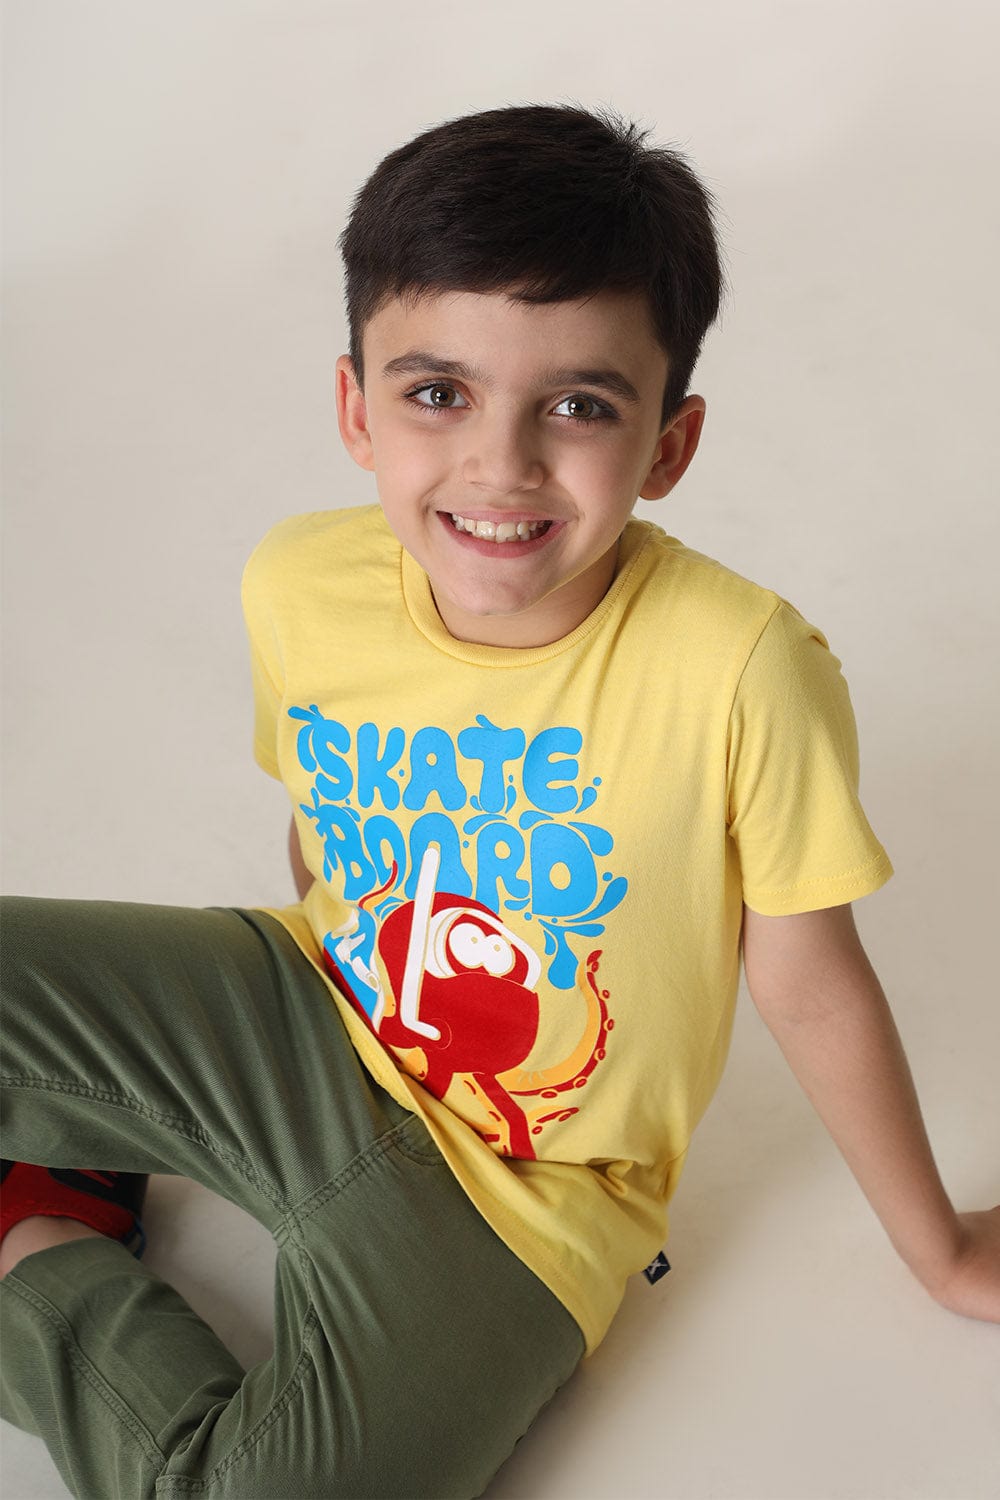 Hope Not Out by Shahid Afridi Boys Knit T-Shirt Boys Yellow Skate Board T-Shirt